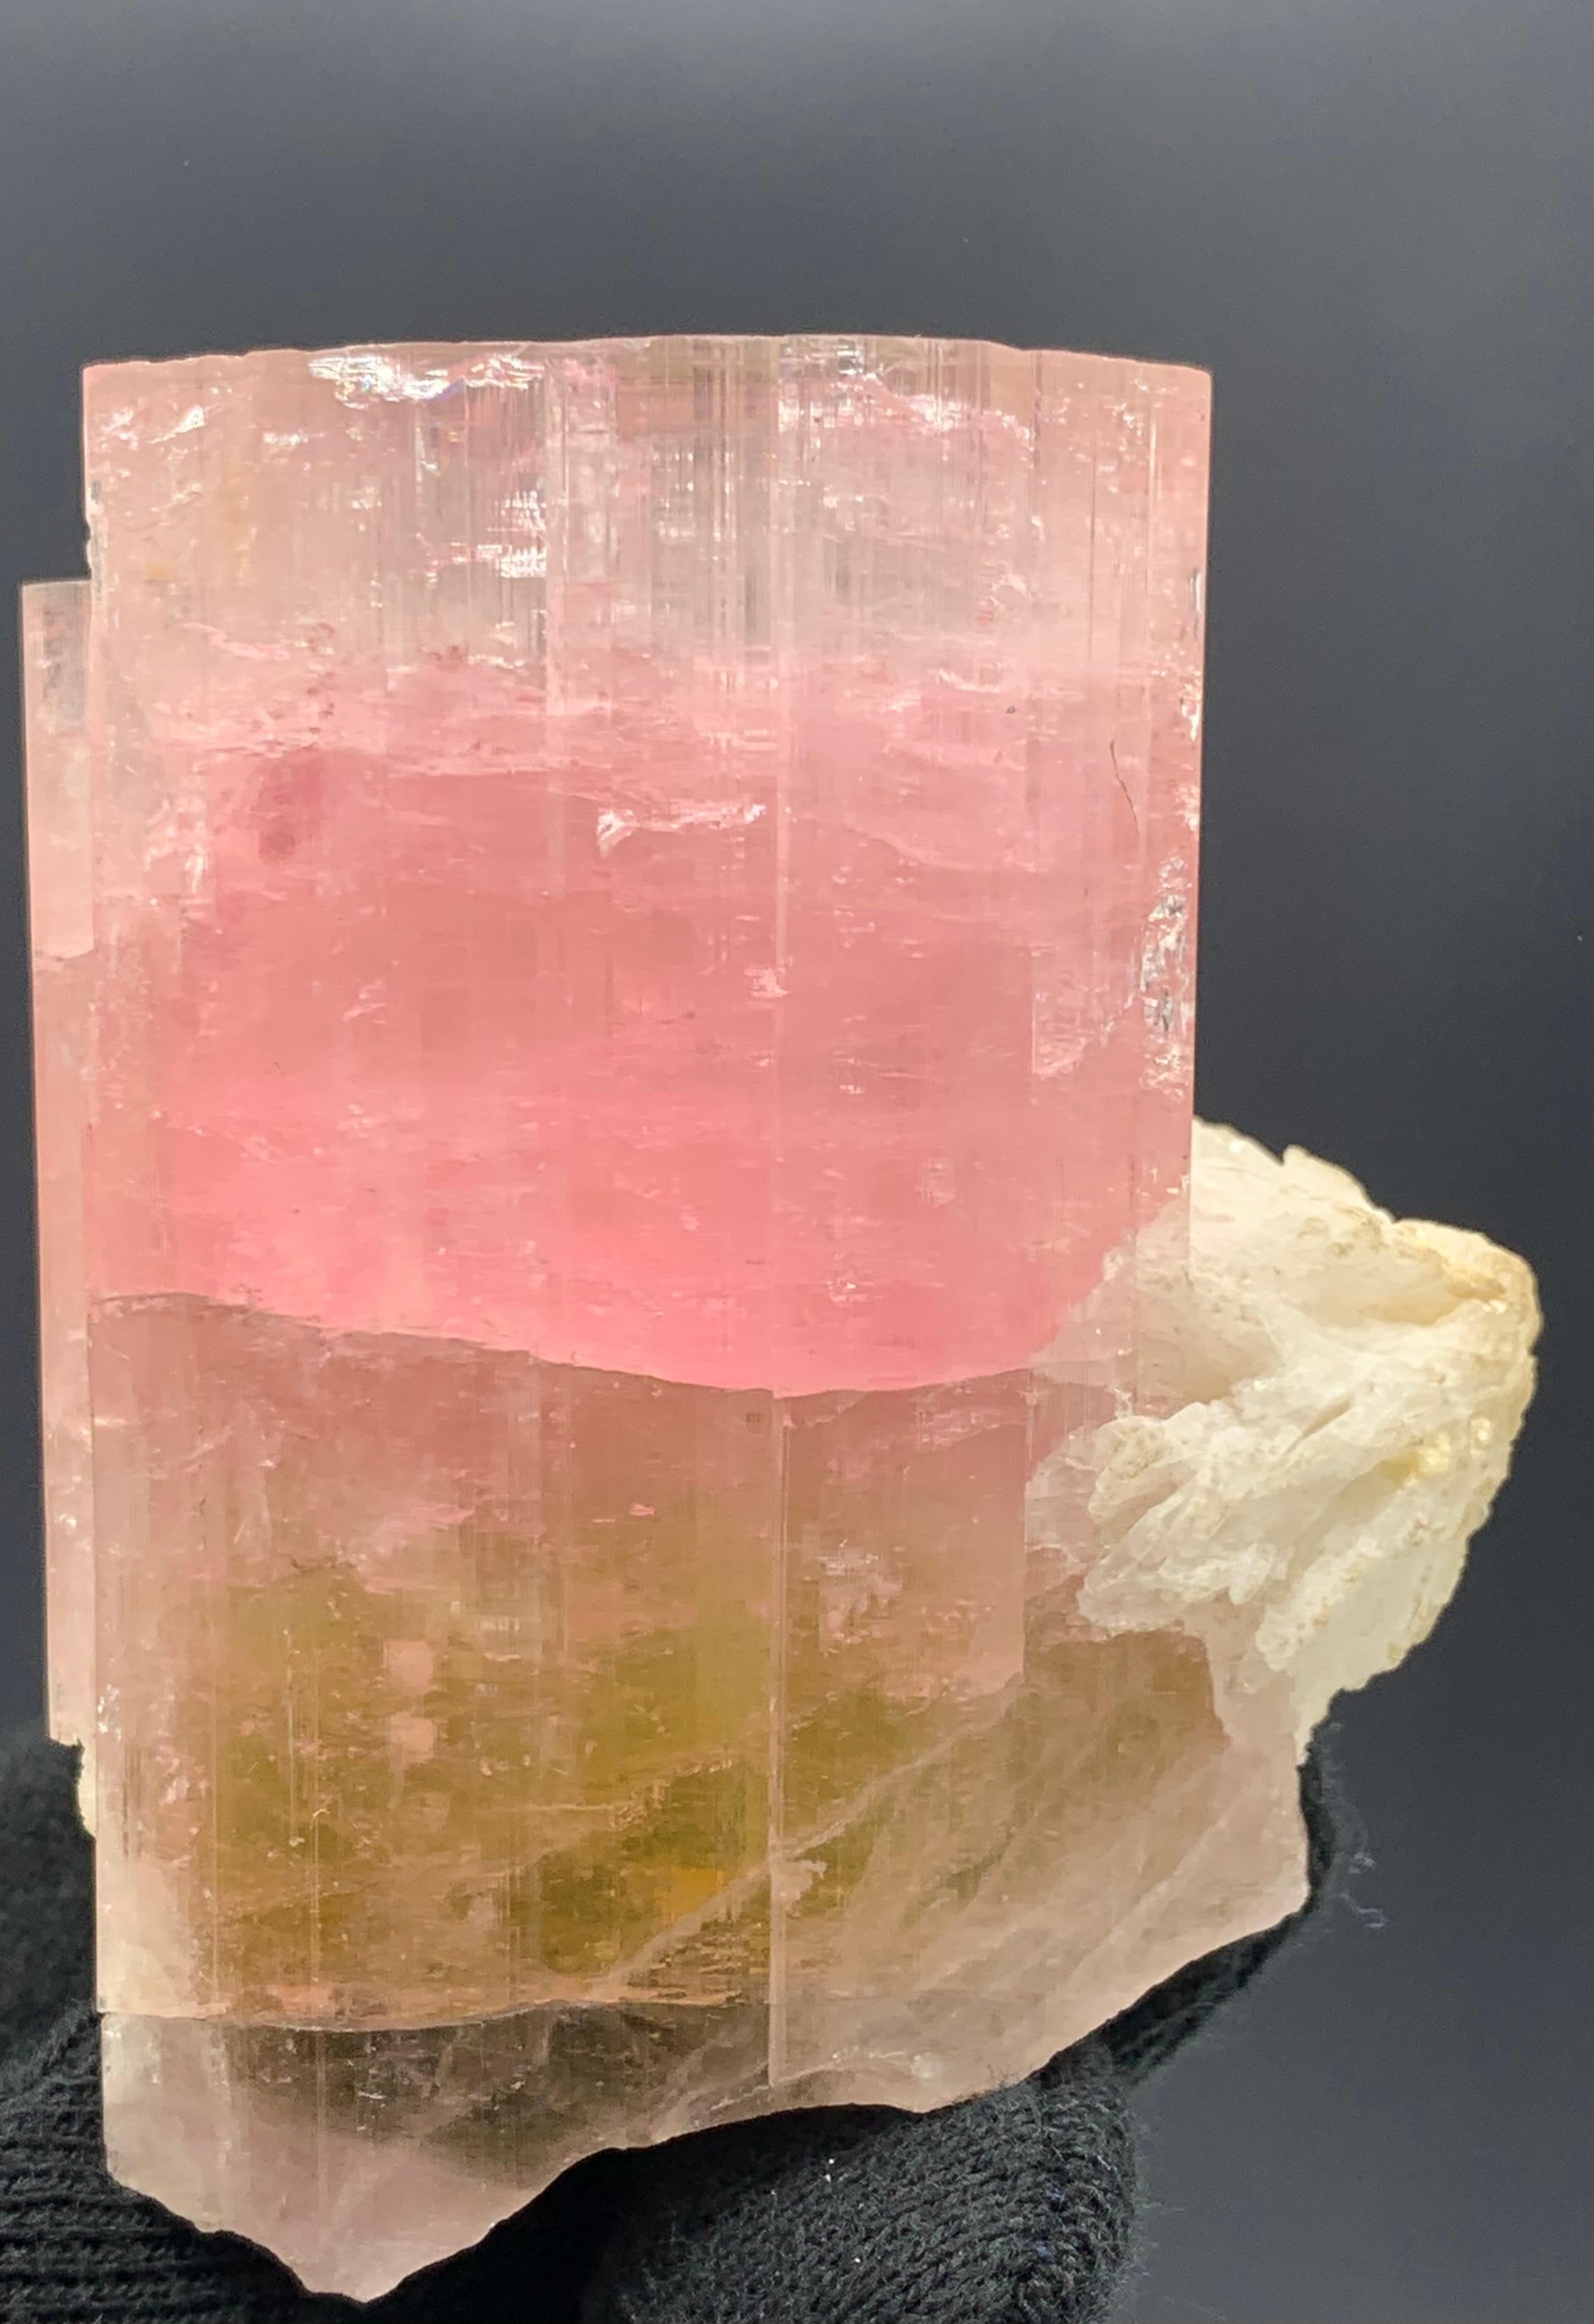 161.78 Gram Marvellous Tri Color Tourmaline Specimen From Paprook , Afghanistan 

Weight: 161.78 Gram
Dimension: 6.5 x 5.5 x 3.7 Cm
Origin: Paprook, Afghanistan 

Tourmaline is a crystalline silicate mineral group in which boron is compounded with